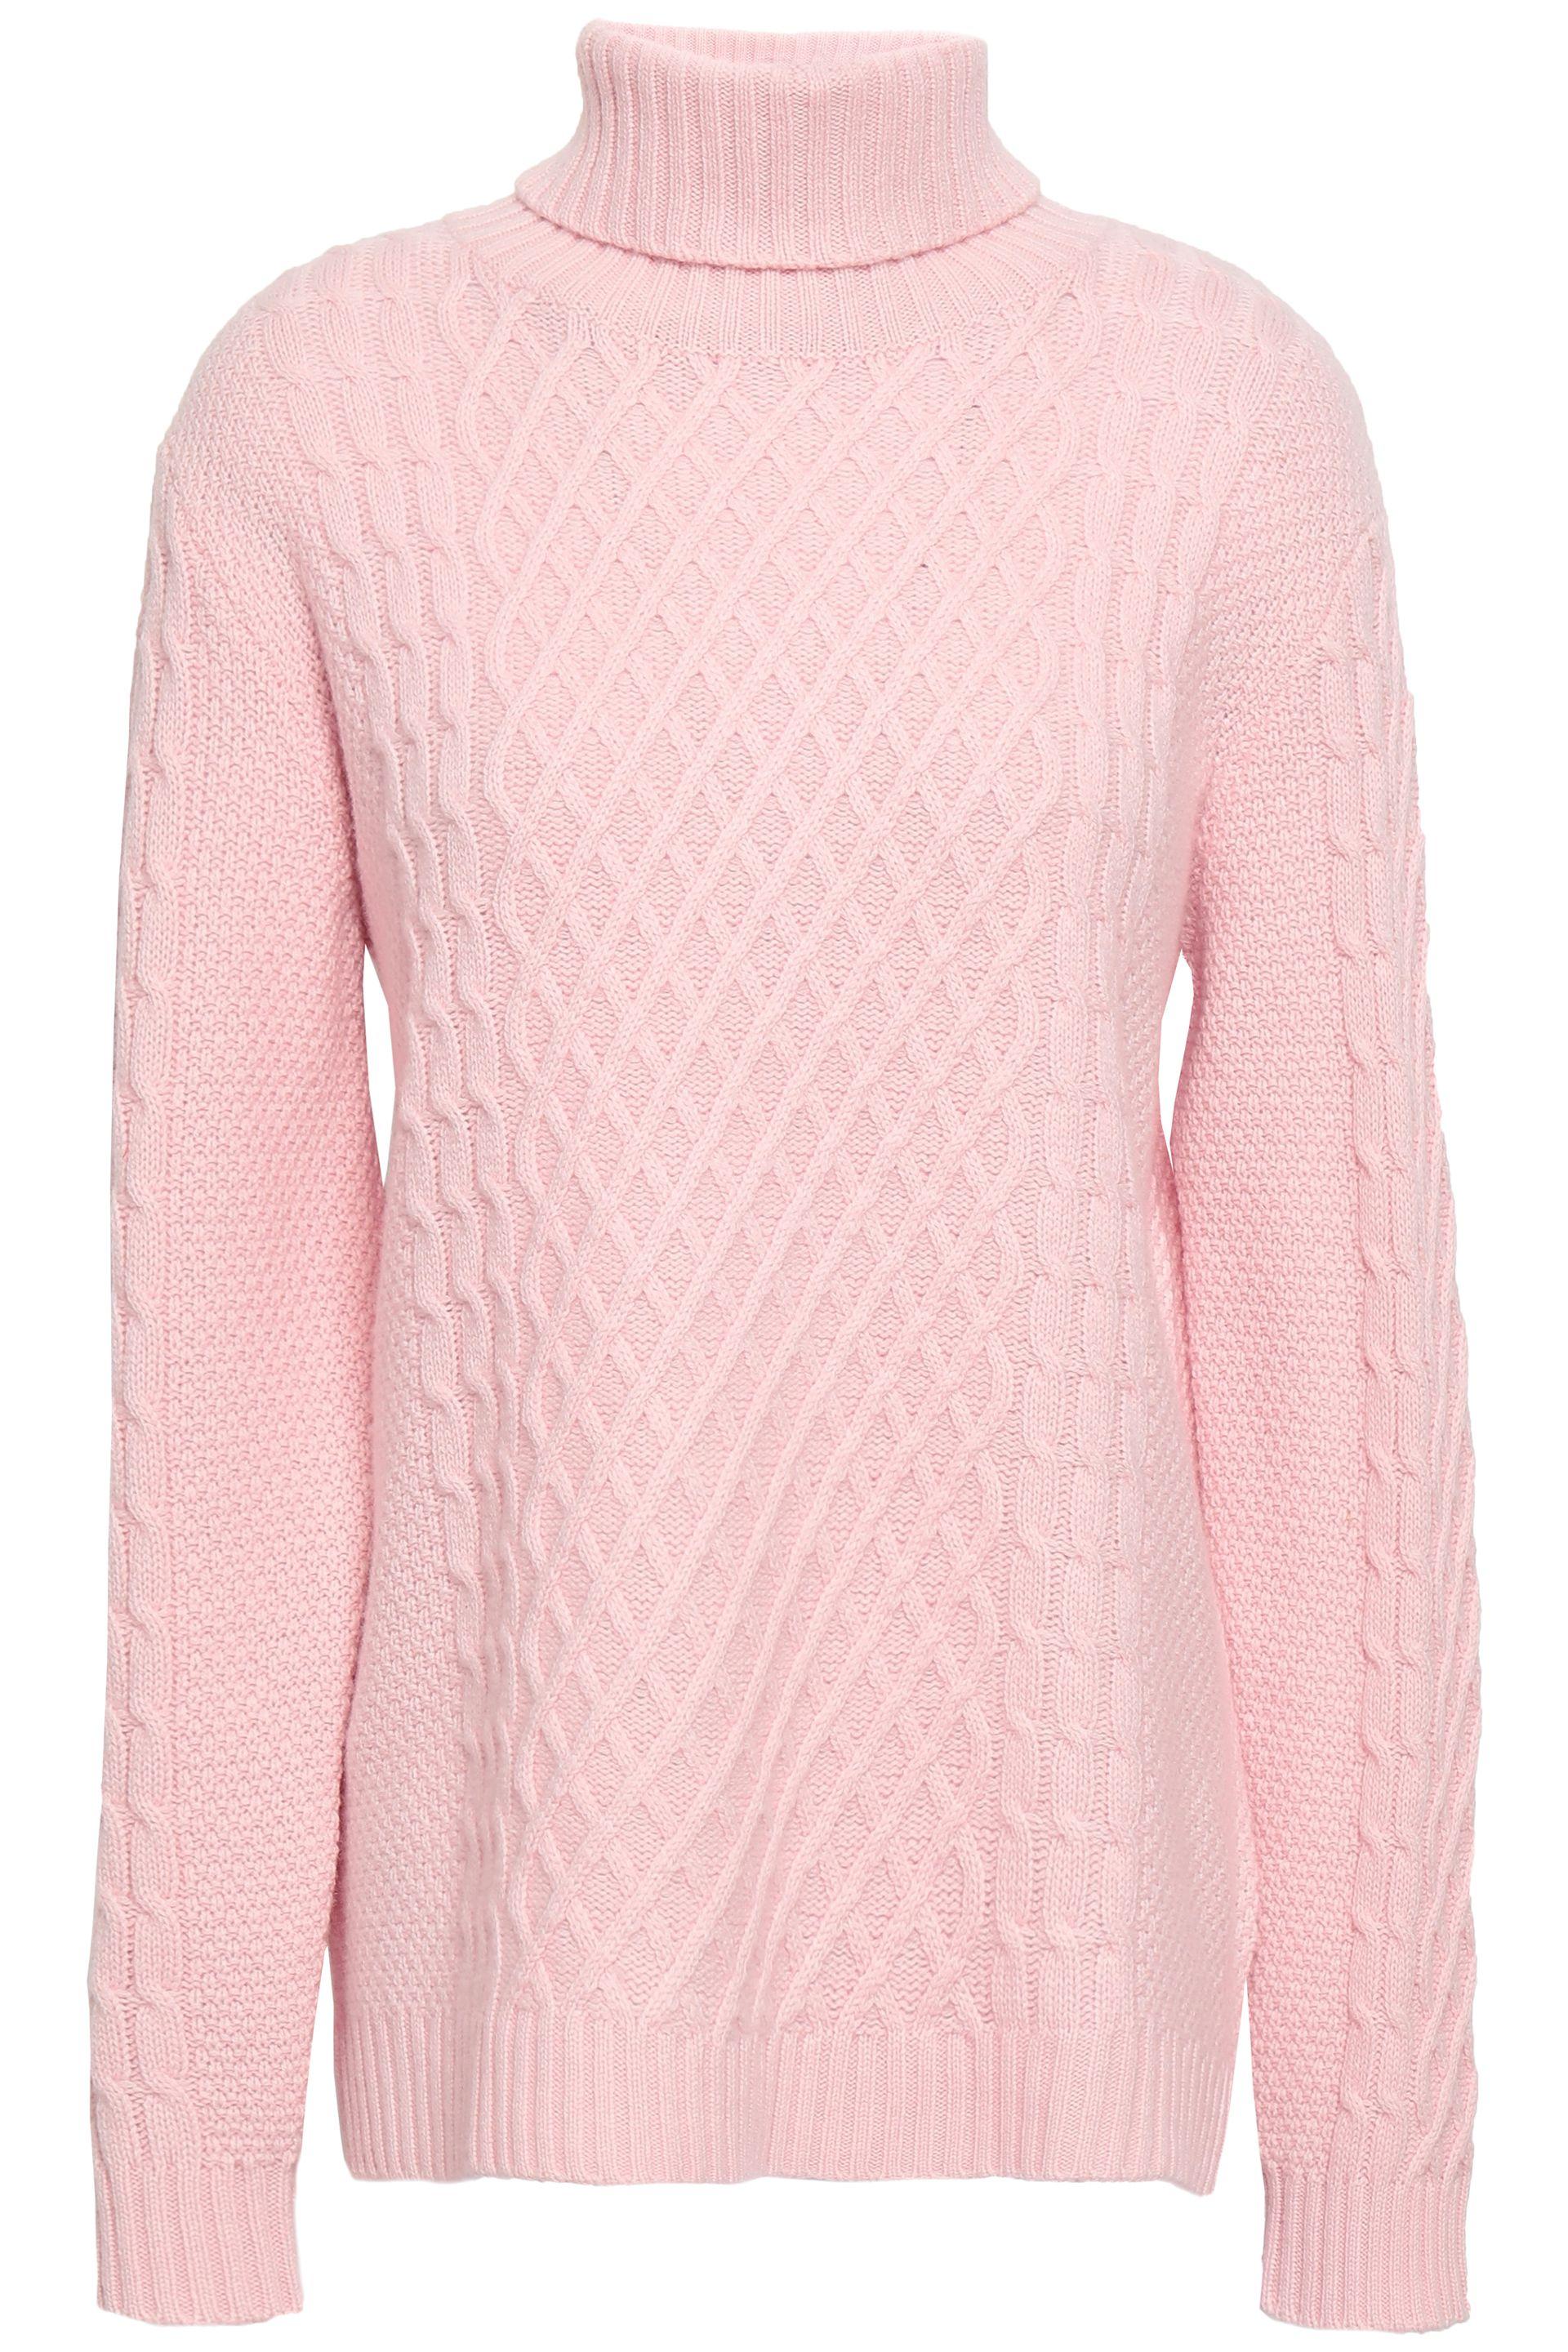 Chinti & Parker Cable-knit Wool And Cashmere-blend Turtleneck Sweater ...